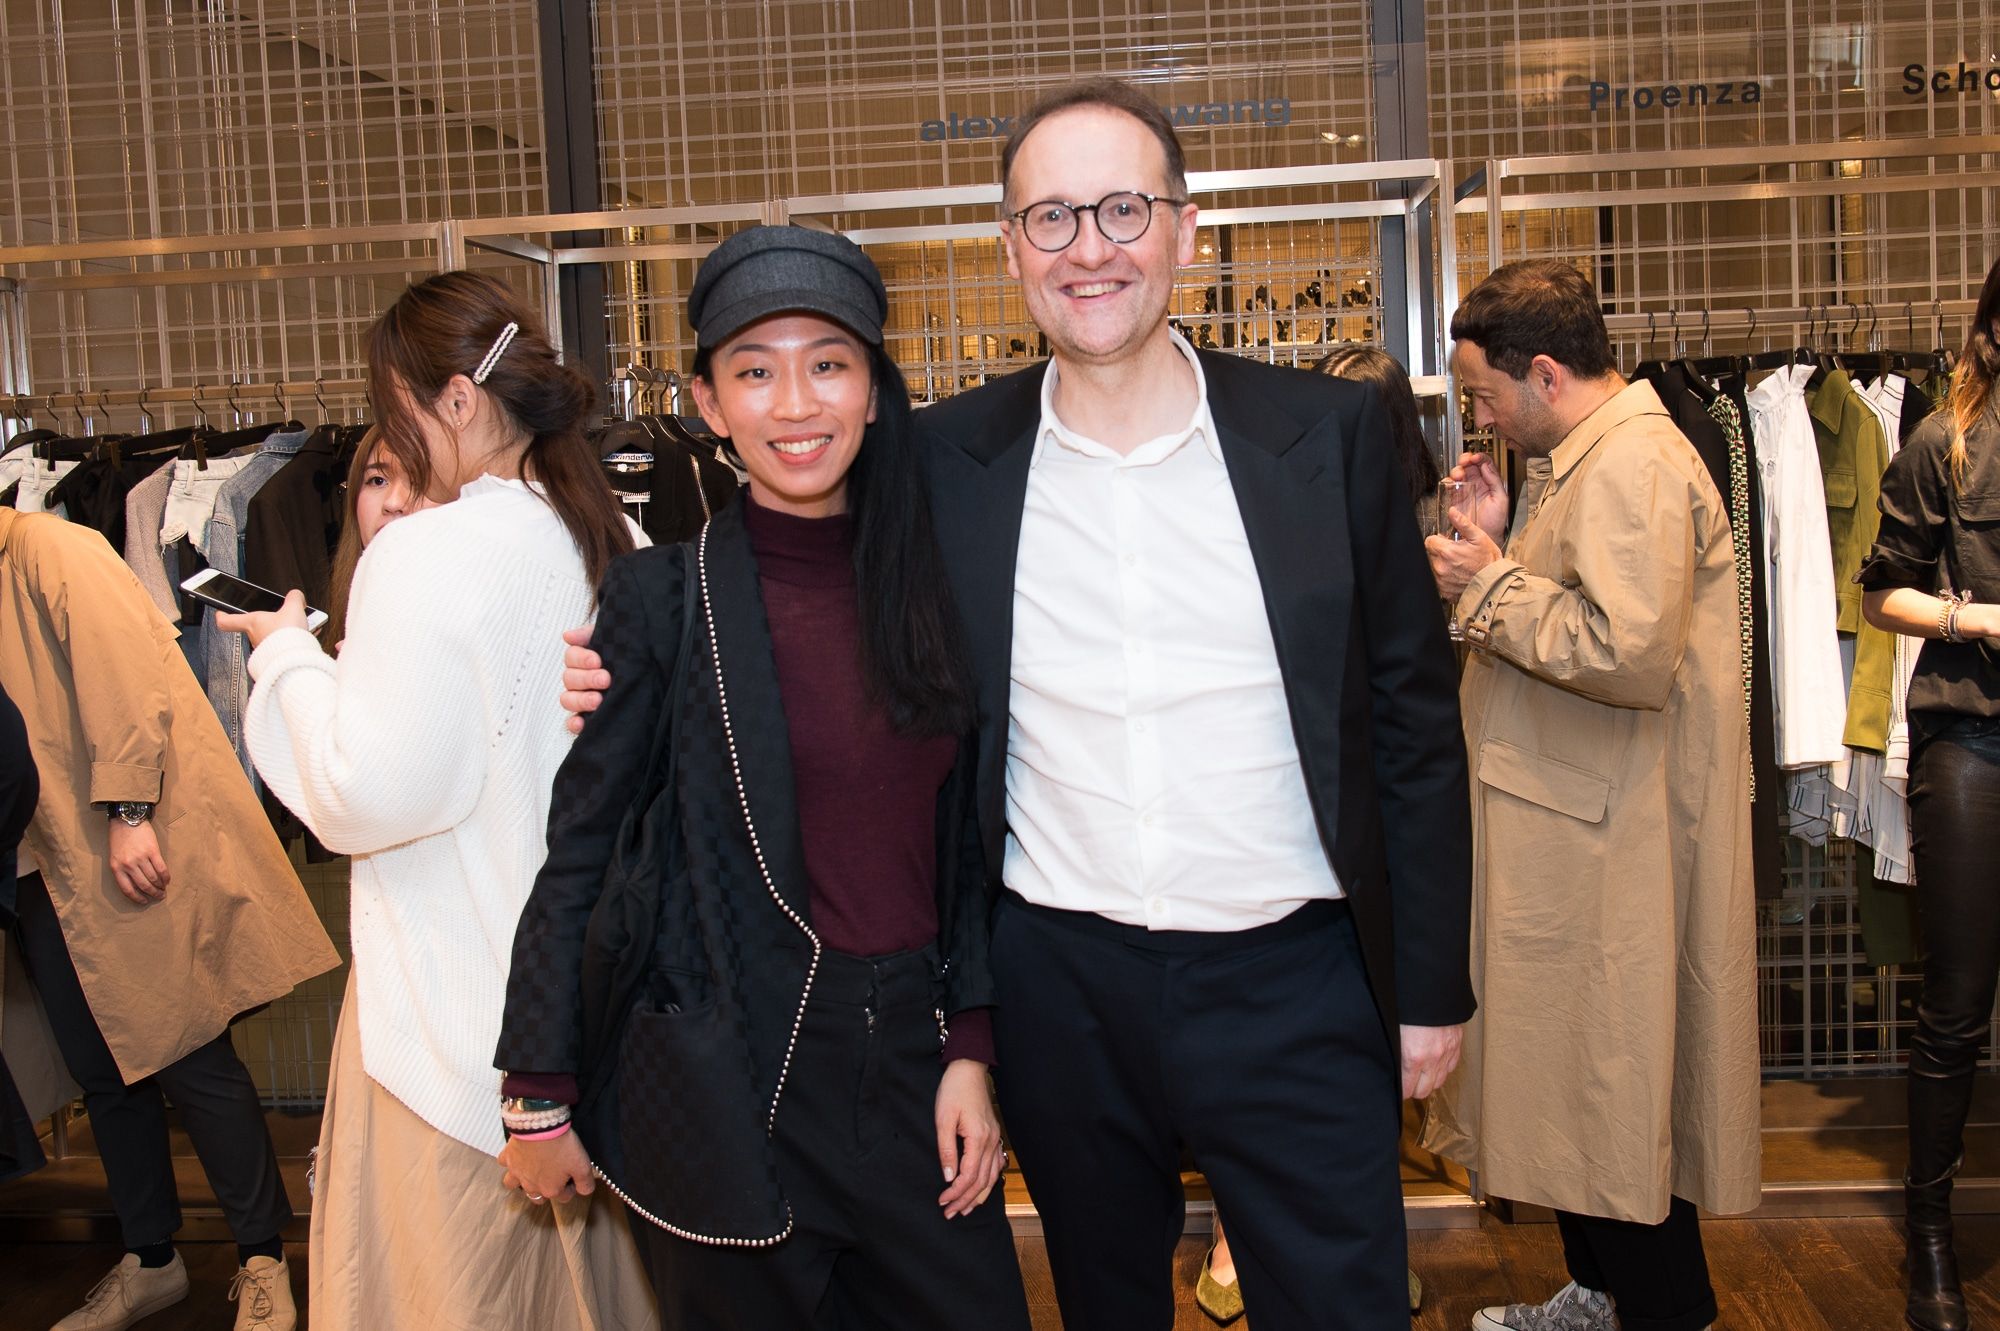 Gallery: Lane Crawford's 'A celebratory evening with Theory' event